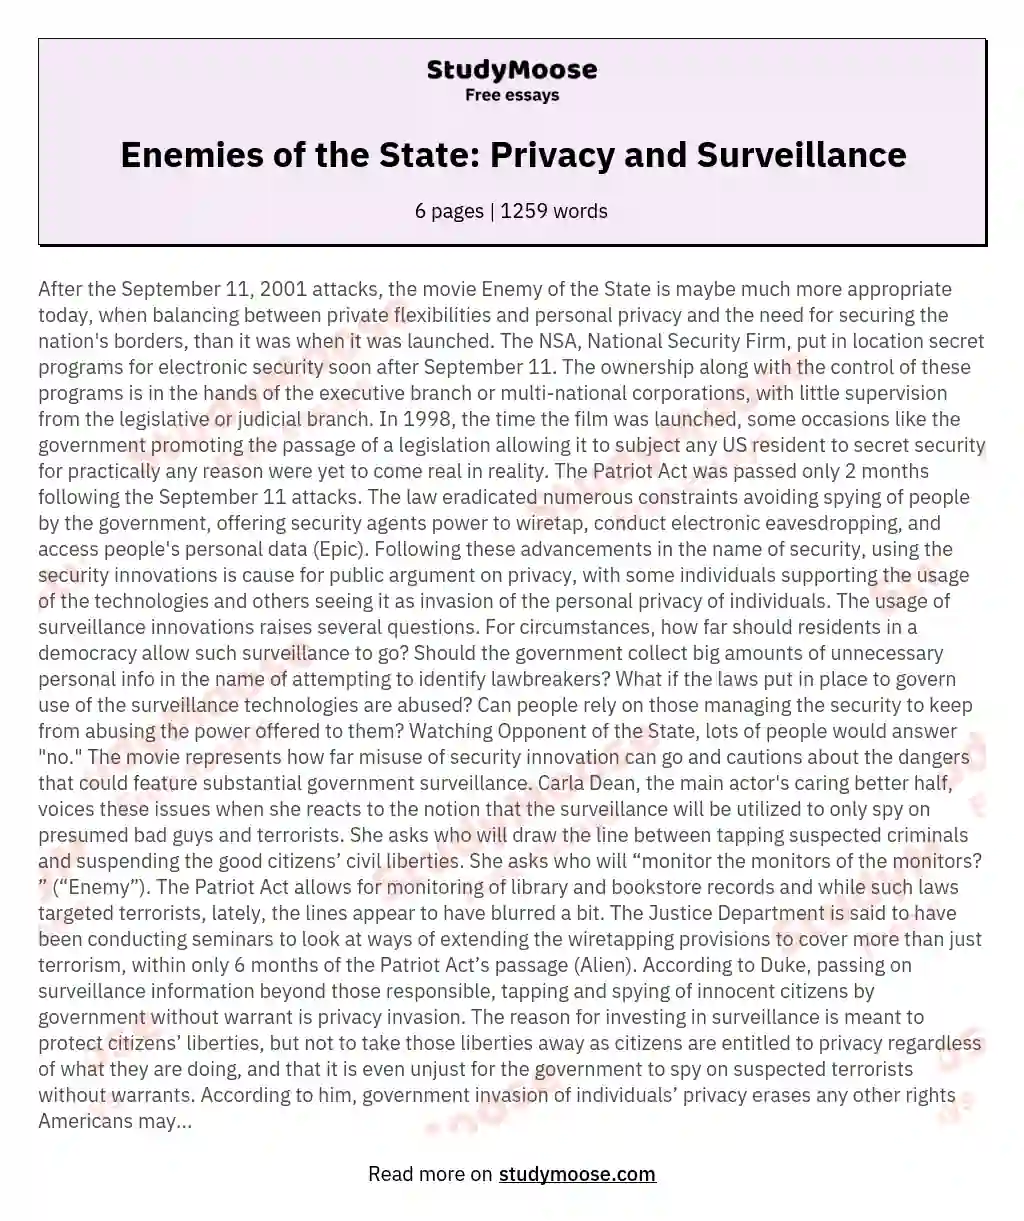 Enemies of the State: Privacy and Surveillance essay